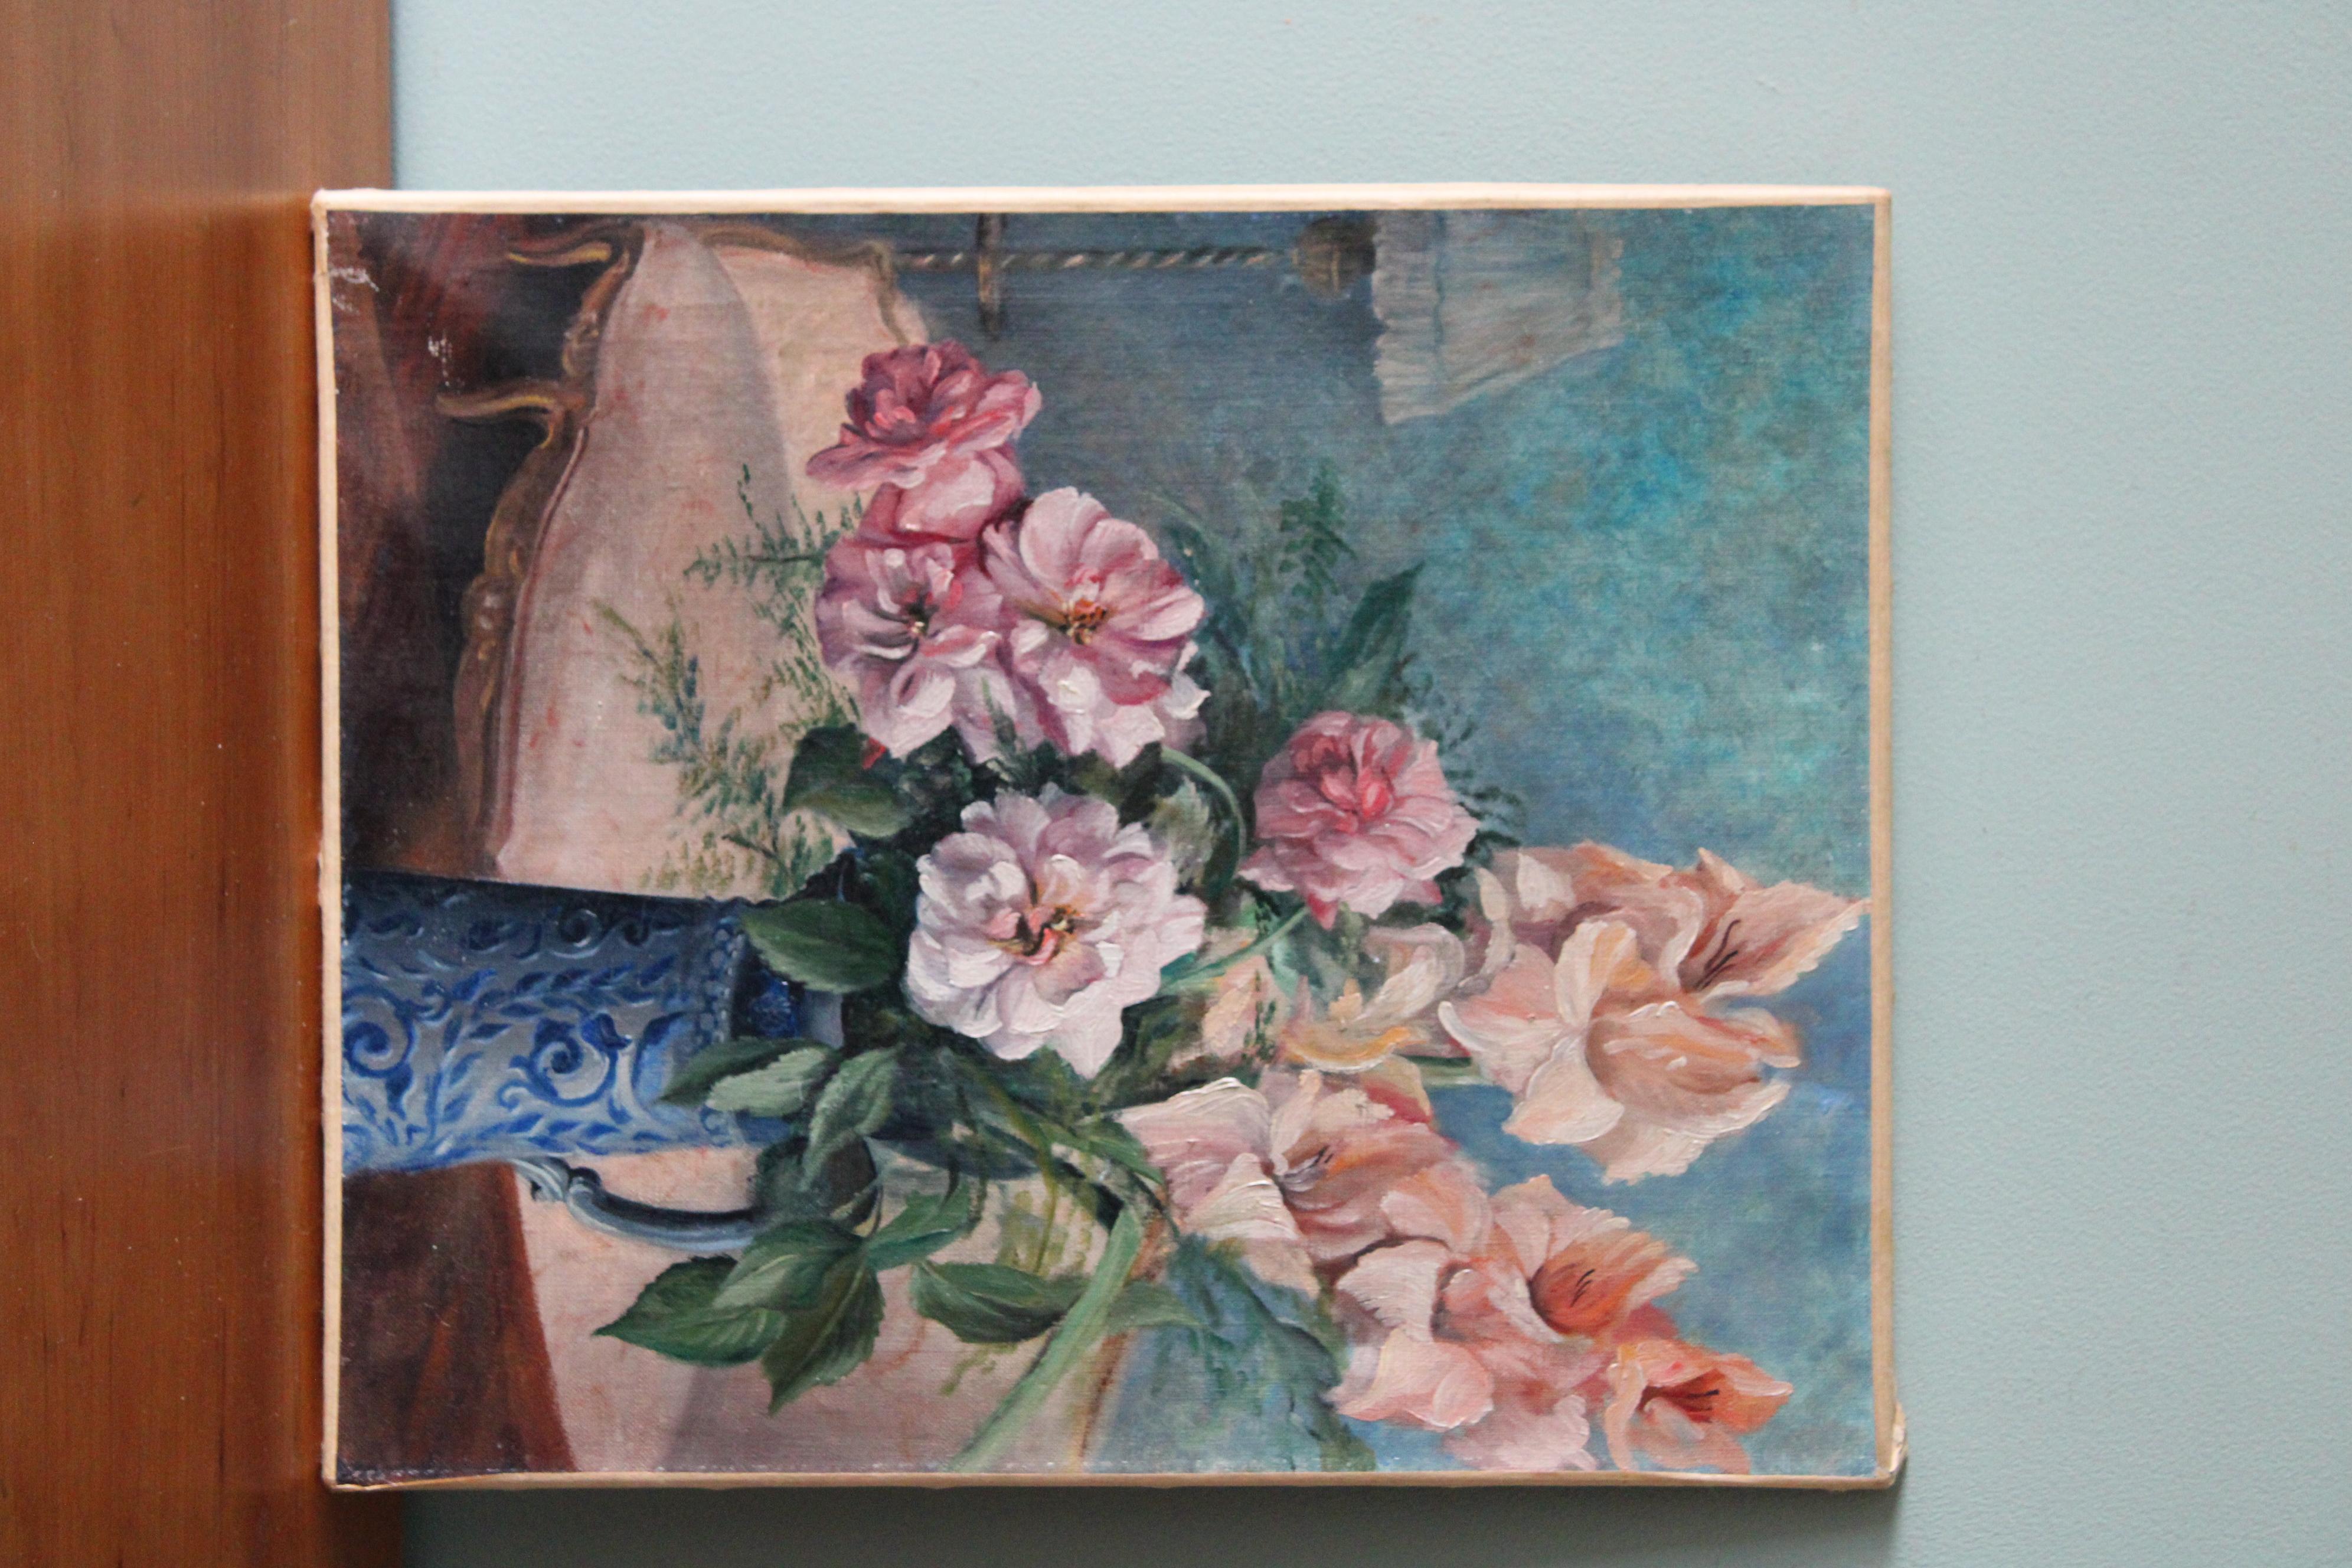 Vintage still life oil painting, floral interior painting, pink flower bouquet - Painting by Unknown